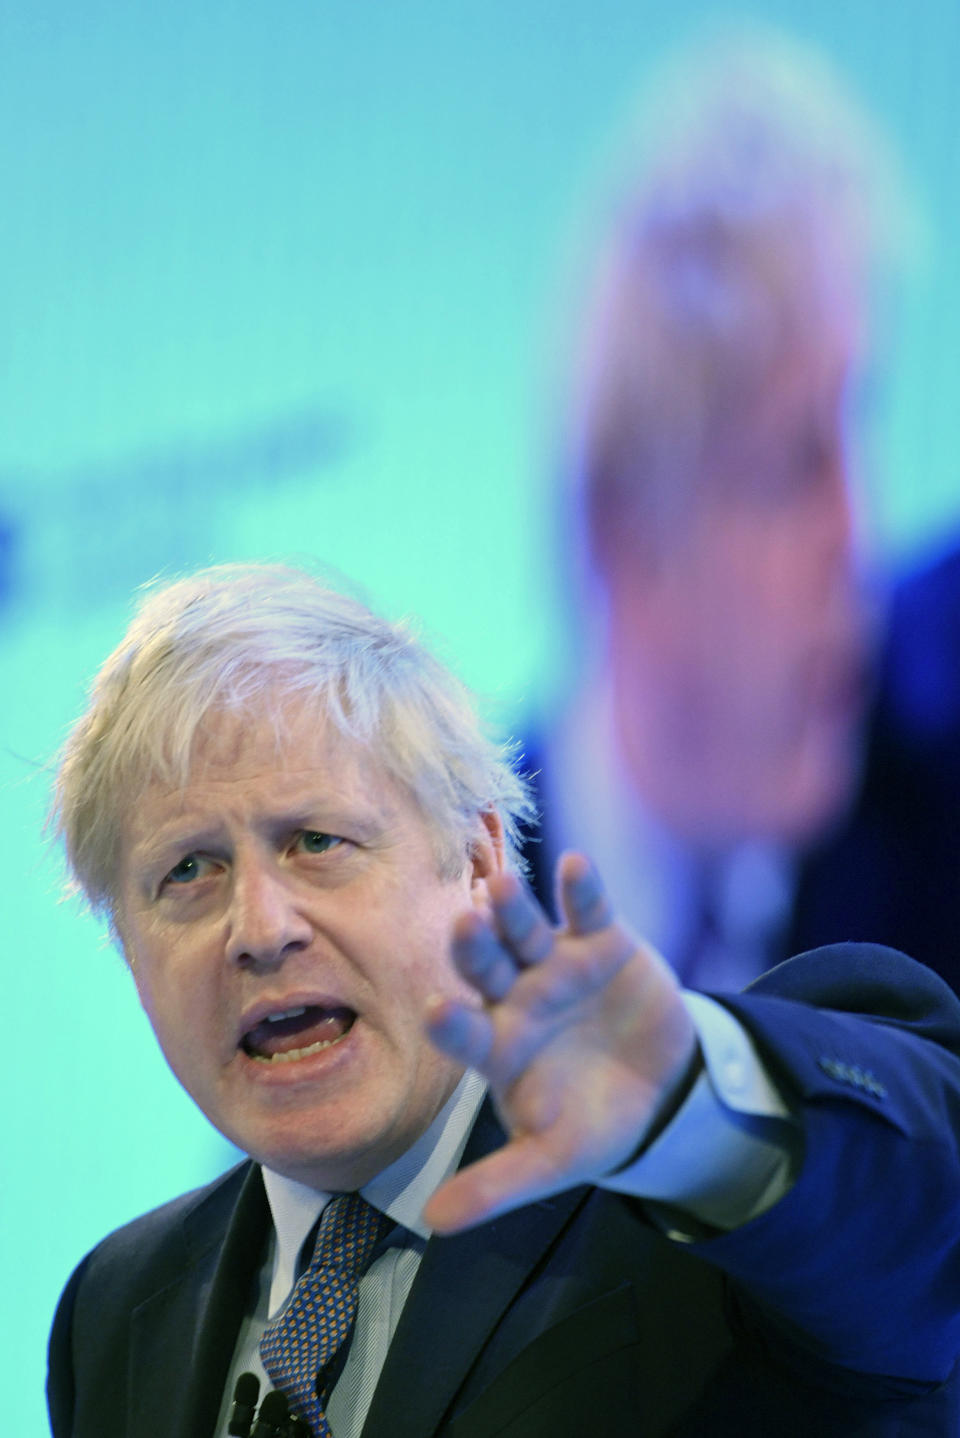 Britain's Prime Minister Boris Johnson speaking at the Confederation of British Industry (CBI) annual conference in London, Monday Nov. 18, 2019. Britain's Brexit is one of the main issues for political parties and for voters, as the UK goes to the polls in a General Election on Dec. 12. (Stefan Rousseau/PA via AP)